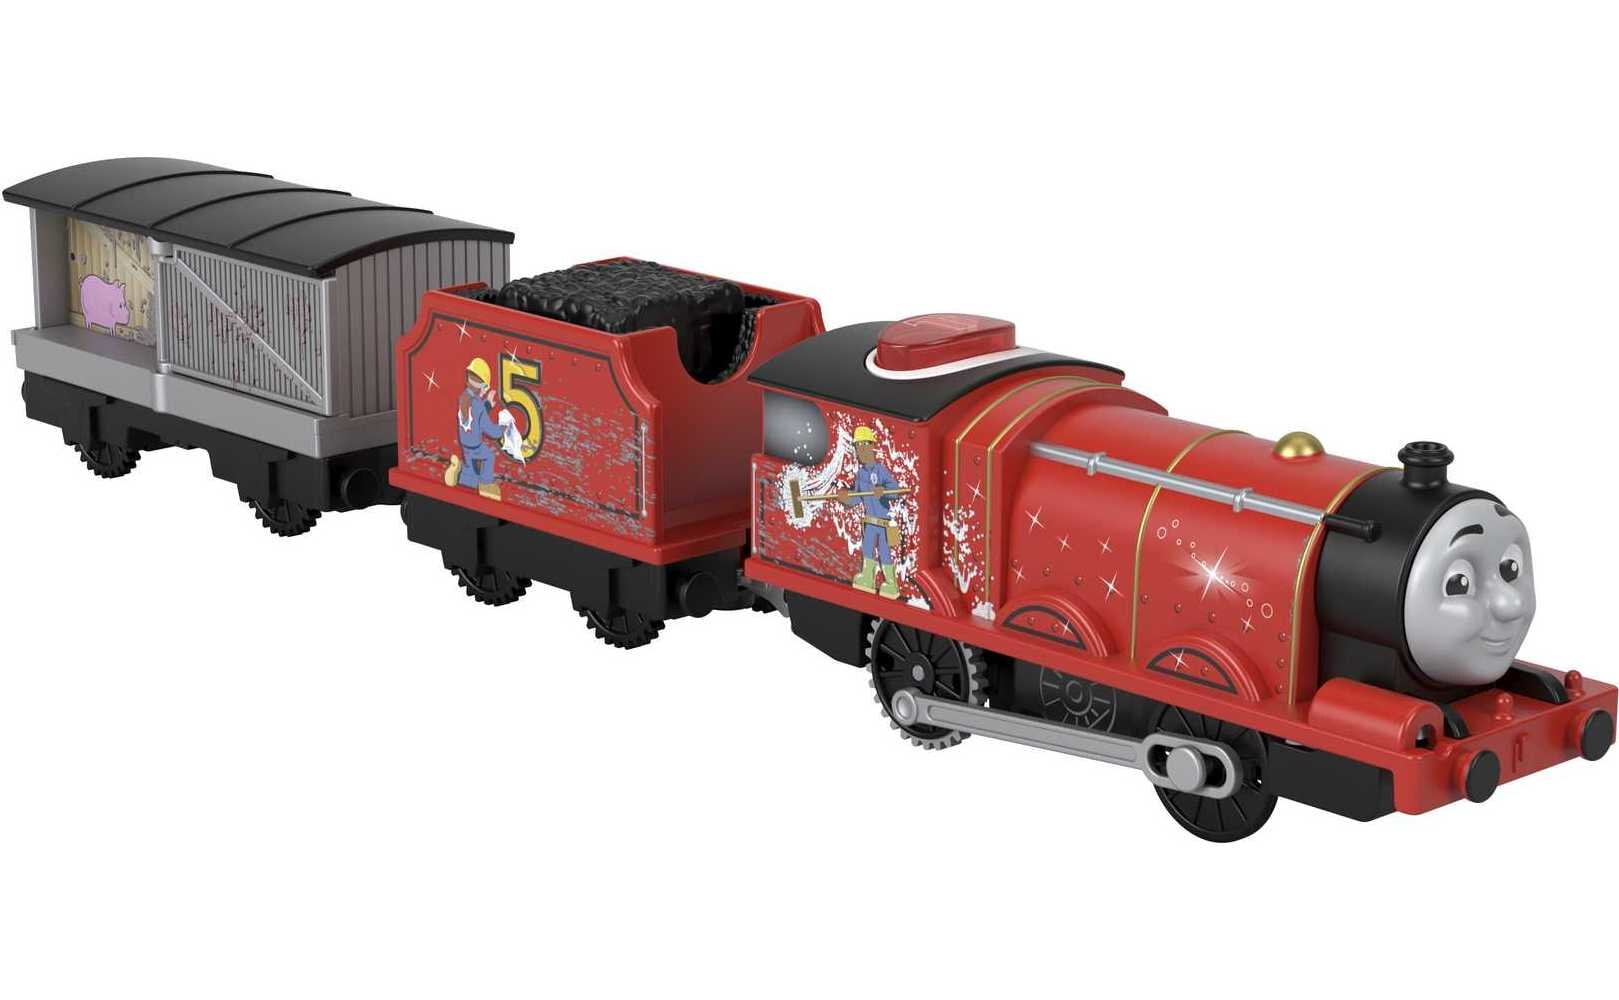 Thomas & Friends Trackmaster Motorized James Train Engine Coal Tender Red No 5 